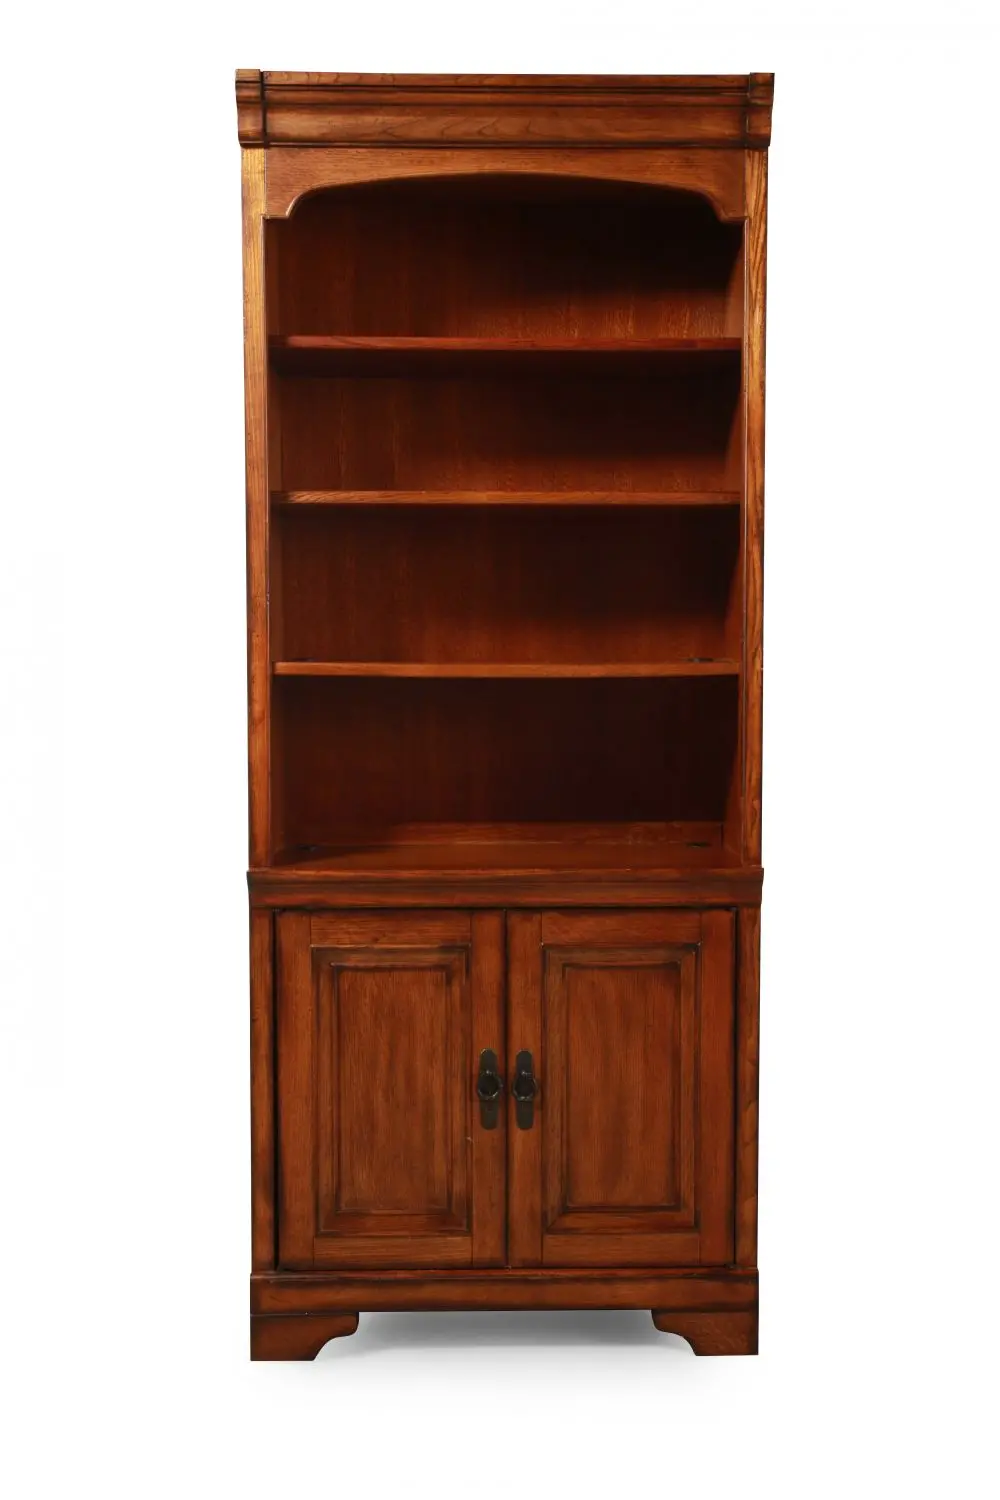 32 Inch Rustic Oak Bookcase with Doors - Centennial Collection-1